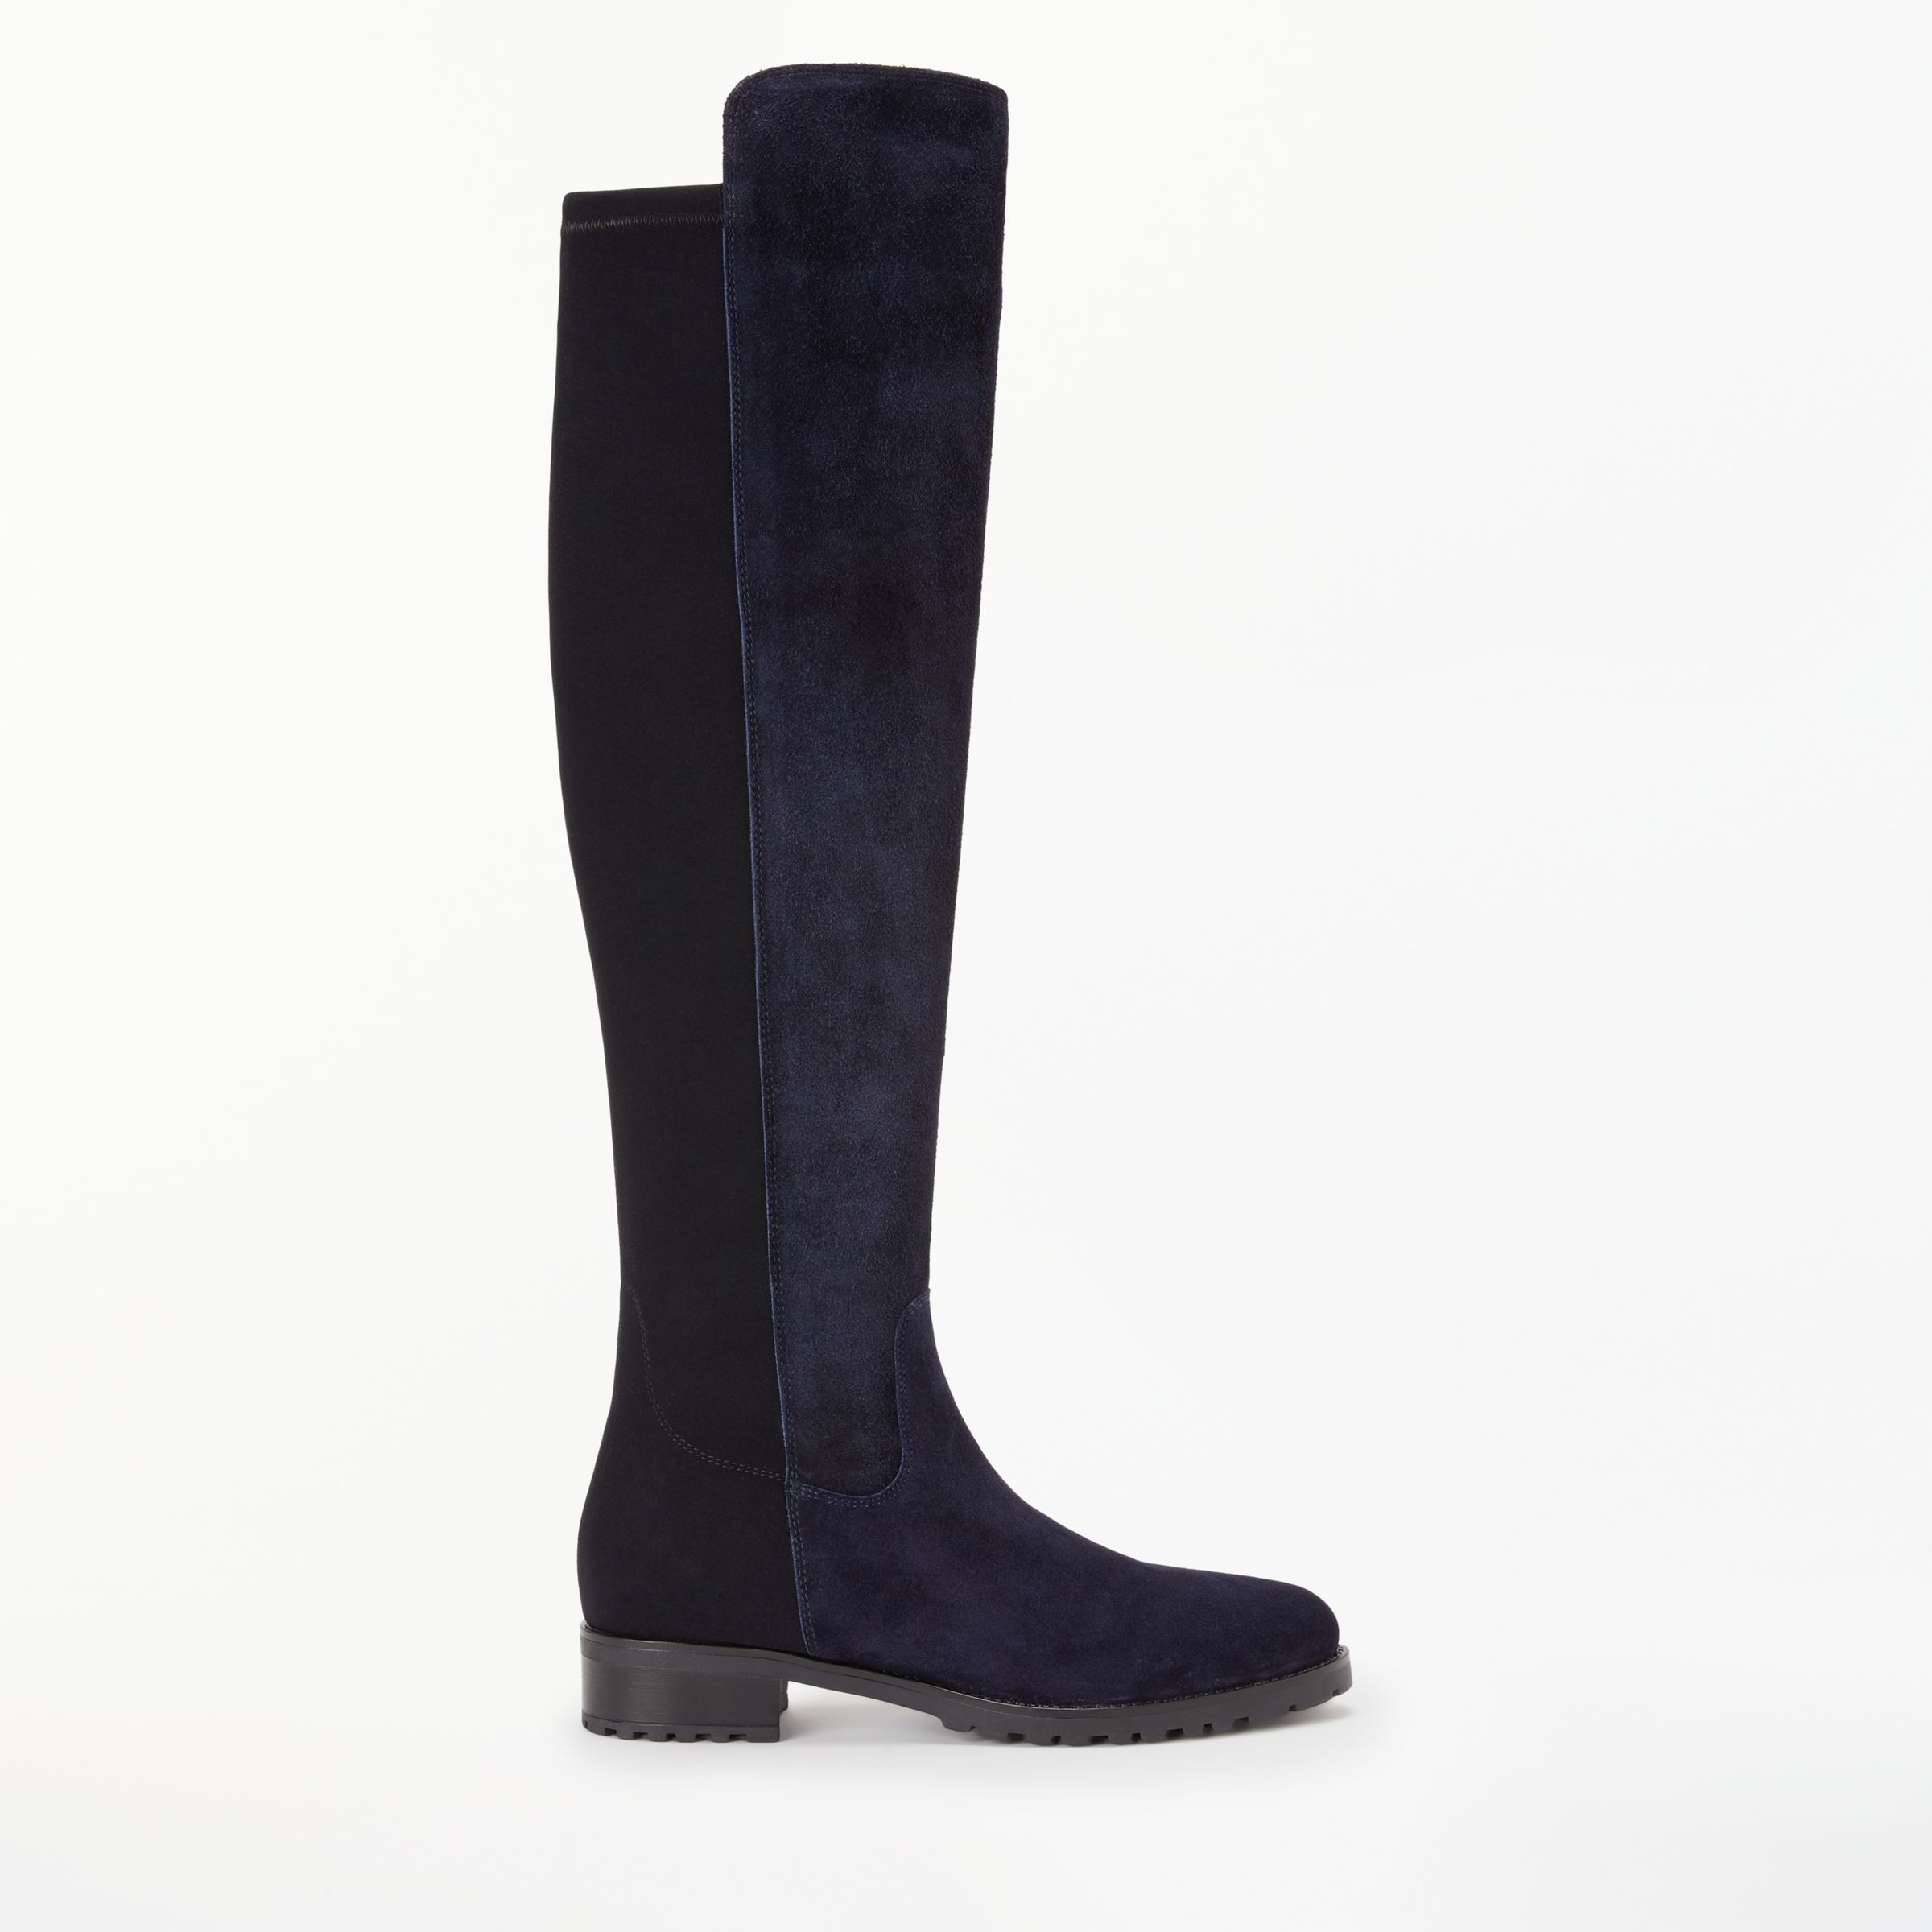 John Lewis Tilda Suede Over The Knee Boots, Navy at John Lewis & Partners